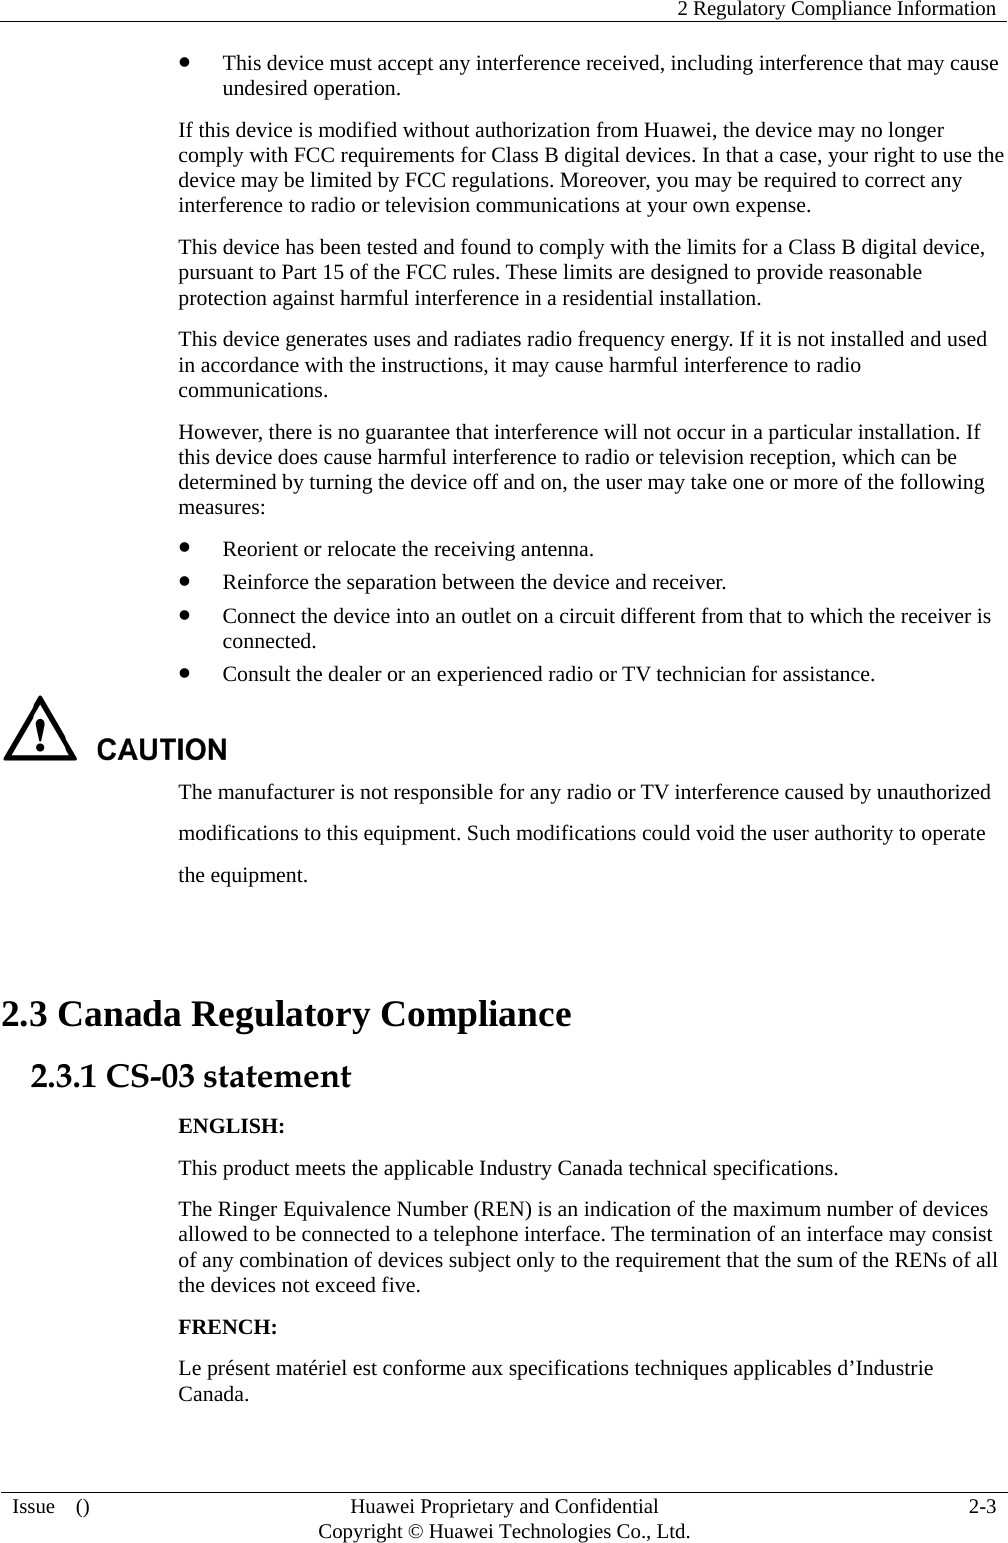    2 Regulatory Compliance Information Issue  ()  Huawei Proprietary and Confidential     Copyright © Huawei Technologies Co., Ltd. 2-3 z This device must accept any interference received, including interference that may cause undesired operation. If this device is modified without authorization from Huawei, the device may no longer comply with FCC requirements for Class B digital devices. In that a case, your right to use the device may be limited by FCC regulations. Moreover, you may be required to correct any interference to radio or television communications at your own expense. This device has been tested and found to comply with the limits for a Class B digital device, pursuant to Part 15 of the FCC rules. These limits are designed to provide reasonable protection against harmful interference in a residential installation. This device generates uses and radiates radio frequency energy. If it is not installed and used in accordance with the instructions, it may cause harmful interference to radio communications. However, there is no guarantee that interference will not occur in a particular installation. If this device does cause harmful interference to radio or television reception, which can be determined by turning the device off and on, the user may take one or more of the following measures: z Reorient or relocate the receiving antenna. z Reinforce the separation between the device and receiver. z Connect the device into an outlet on a circuit different from that to which the receiver is connected. z Consult the dealer or an experienced radio or TV technician for assistance.  The manufacturer is not responsible for any radio or TV interference caused by unauthorized modifications to this equipment. Such modifications could void the user authority to operate the equipment.  2.3 Canada Regulatory Compliance 2.3.1 CS-03 statement ENGLISH: This product meets the applicable Industry Canada technical specifications.   The Ringer Equivalence Number (REN) is an indication of the maximum number of devices allowed to be connected to a telephone interface. The termination of an interface may consist of any combination of devices subject only to the requirement that the sum of the RENs of all the devices not exceed five. FRENCH: Le présent matériel est conforme aux specifications techniques applicables d’Industrie Canada. 